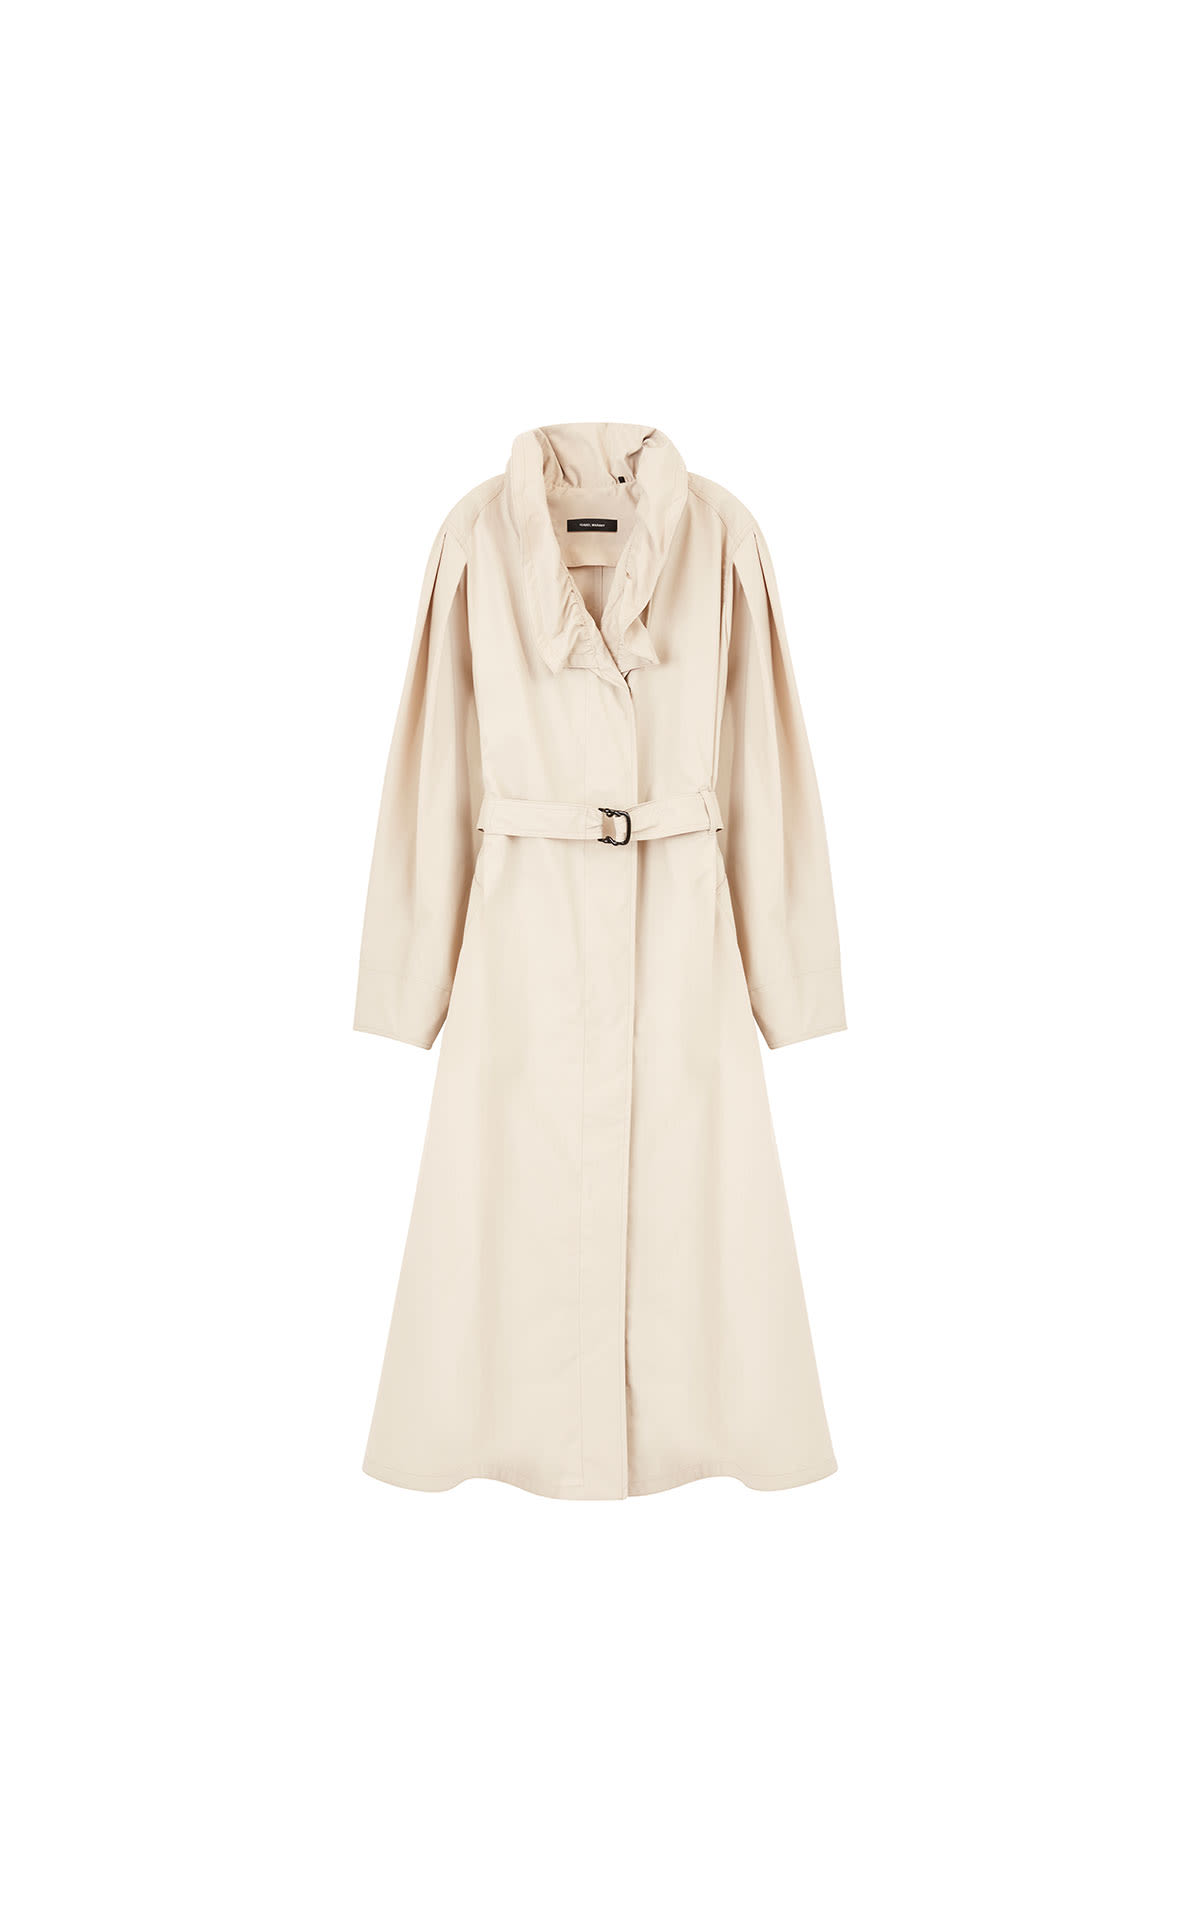 Isabel Marant Lisa trench from Bicester Village